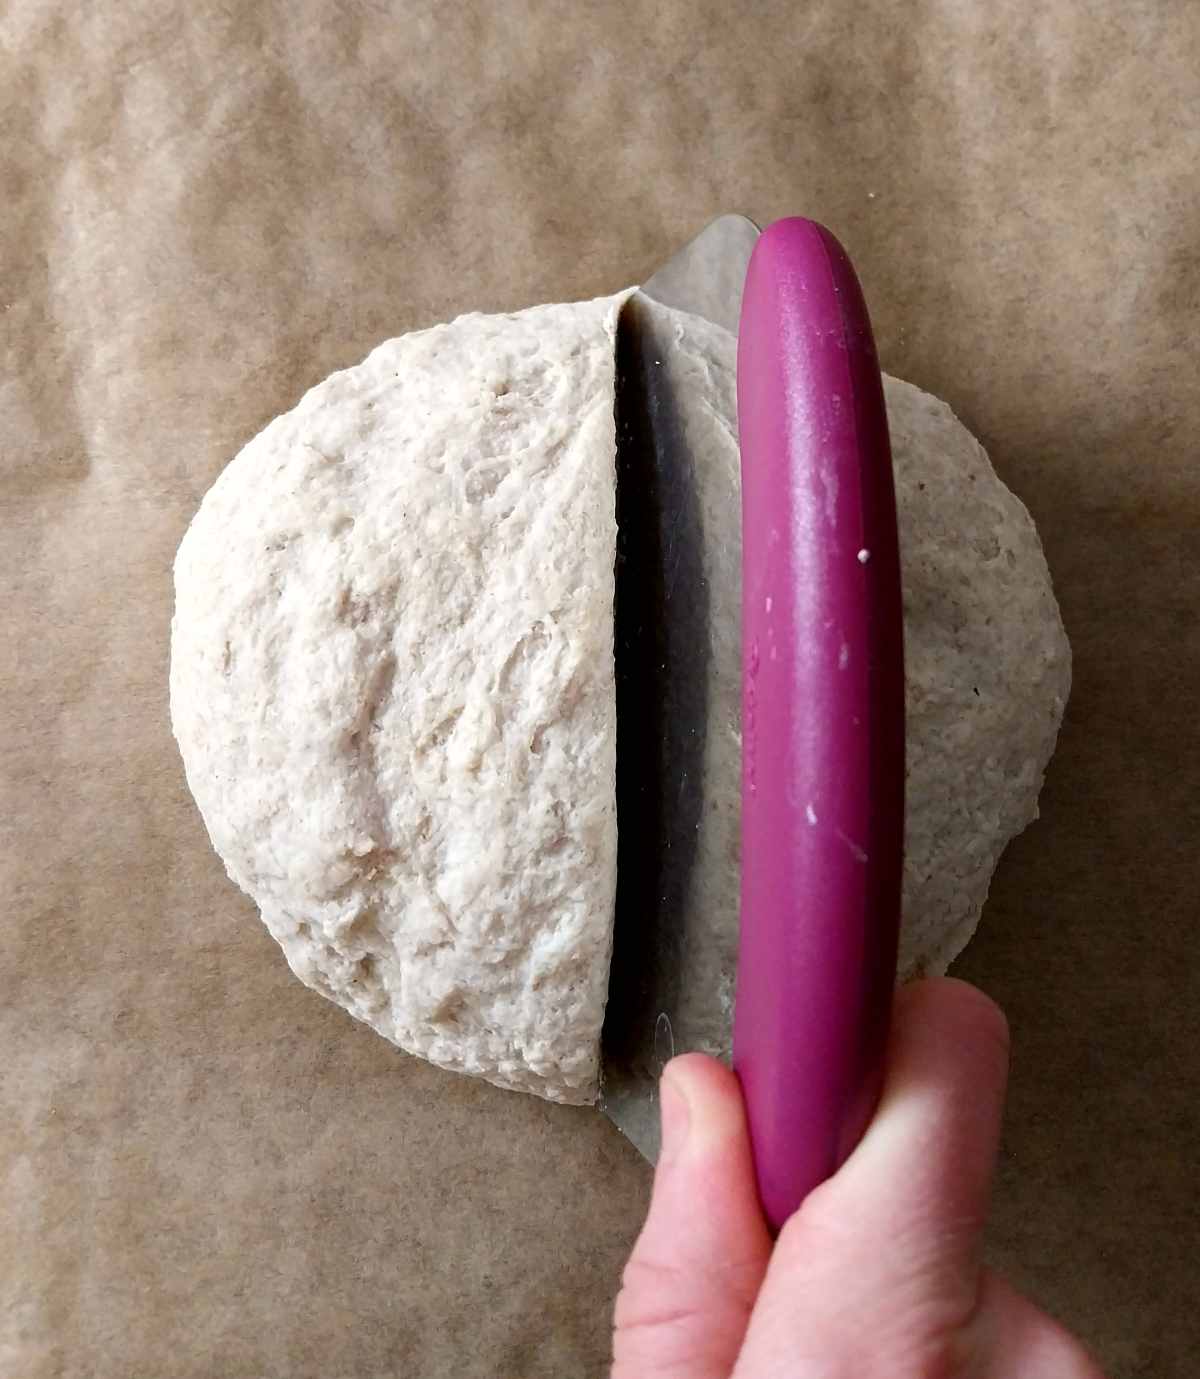 Separating the dough ball into two parts with a bench scraper.